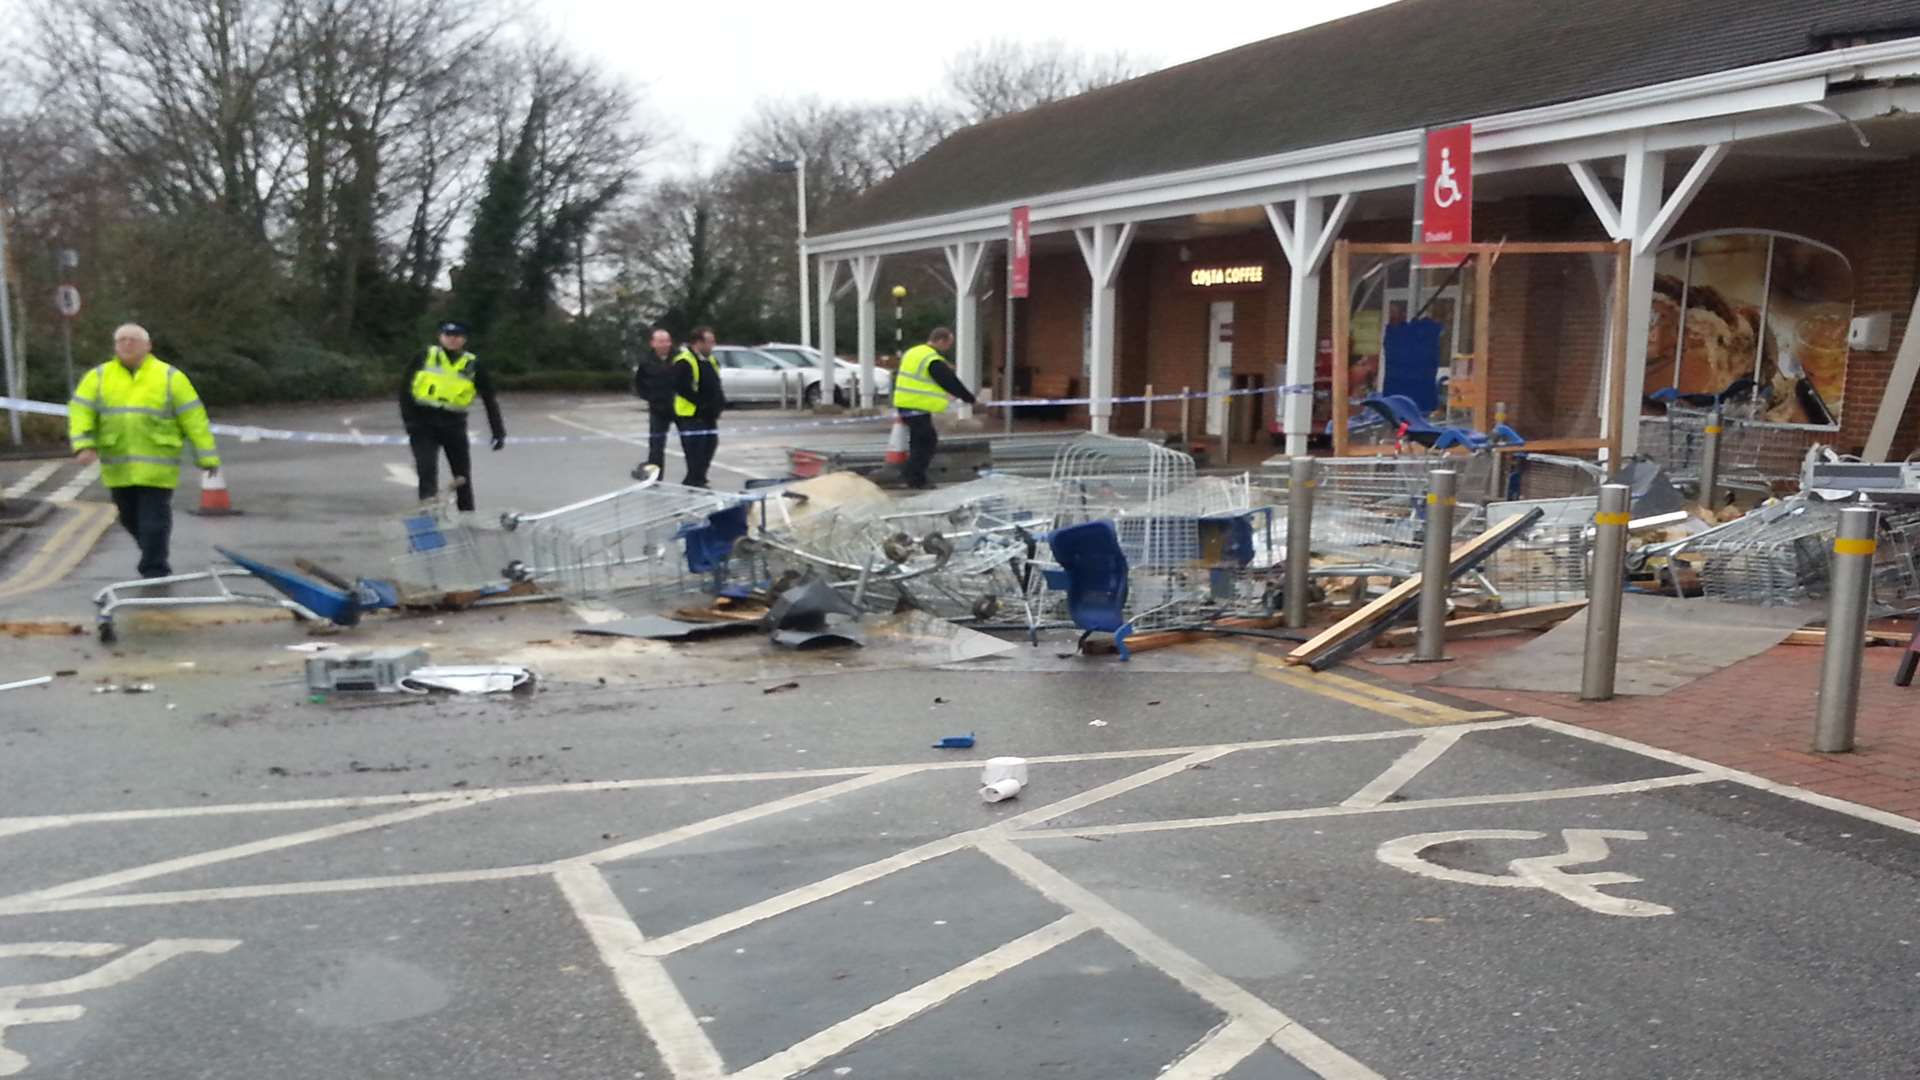 A trail of destruction is left after the ram raiders strike at Tesco